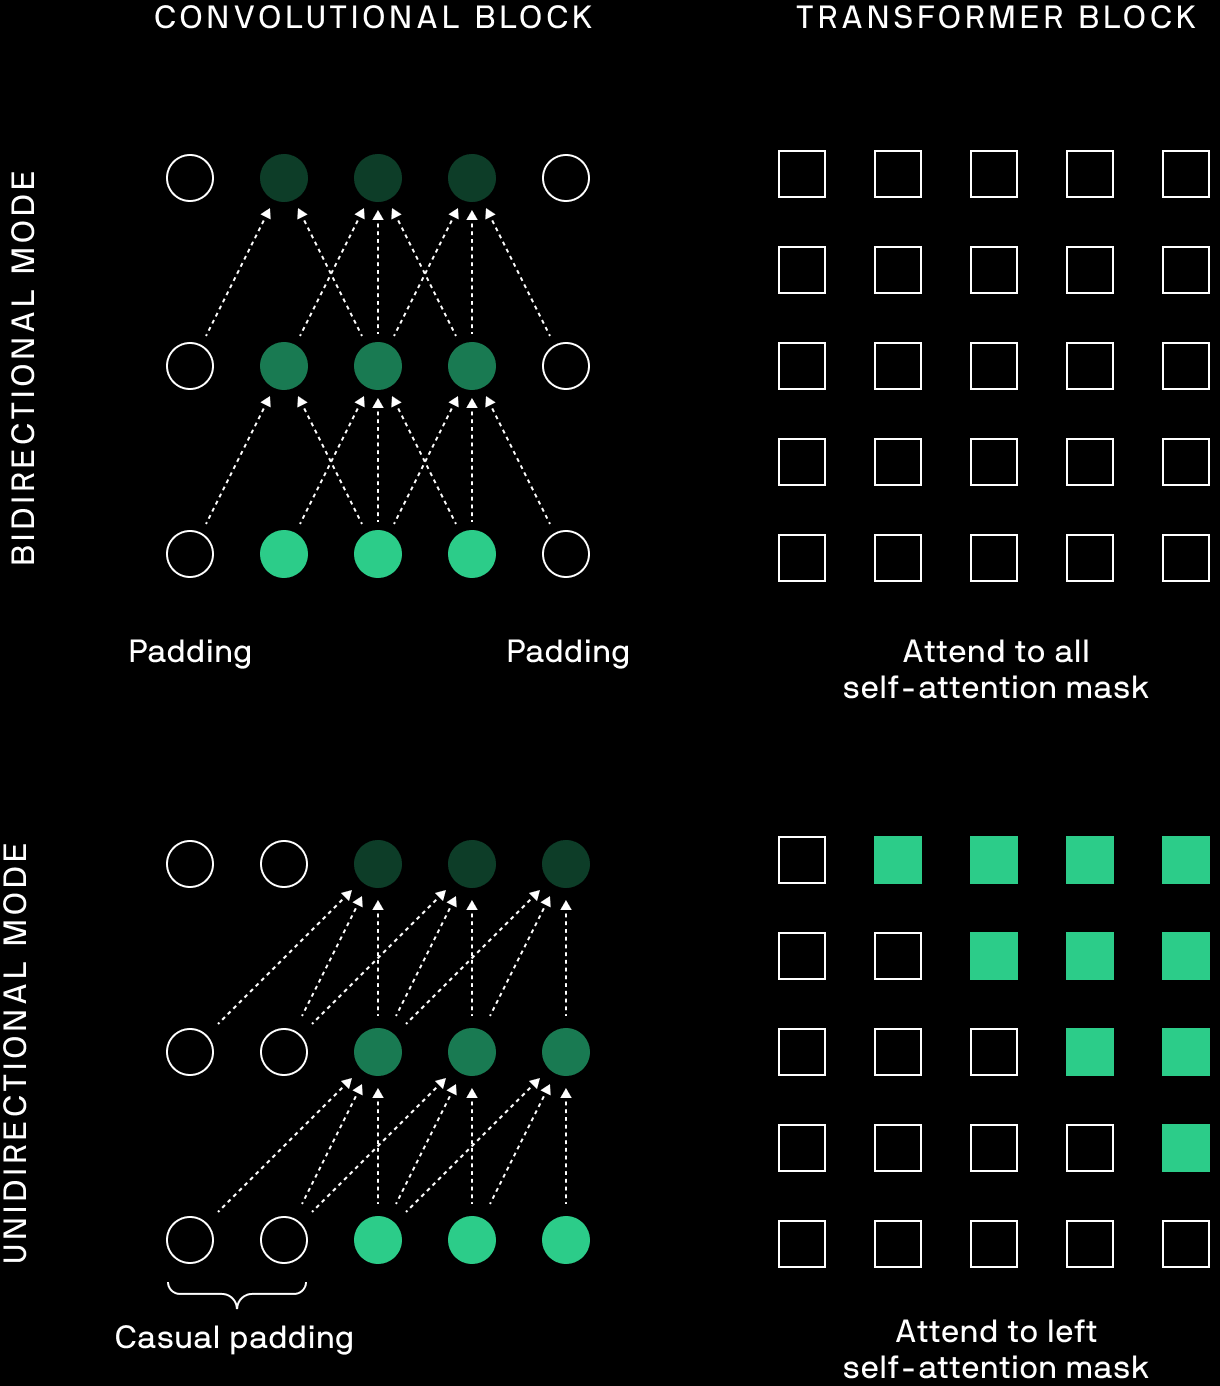 Illustration of bidirectional mode and unidirectional mode for convolutional block and transformer block 